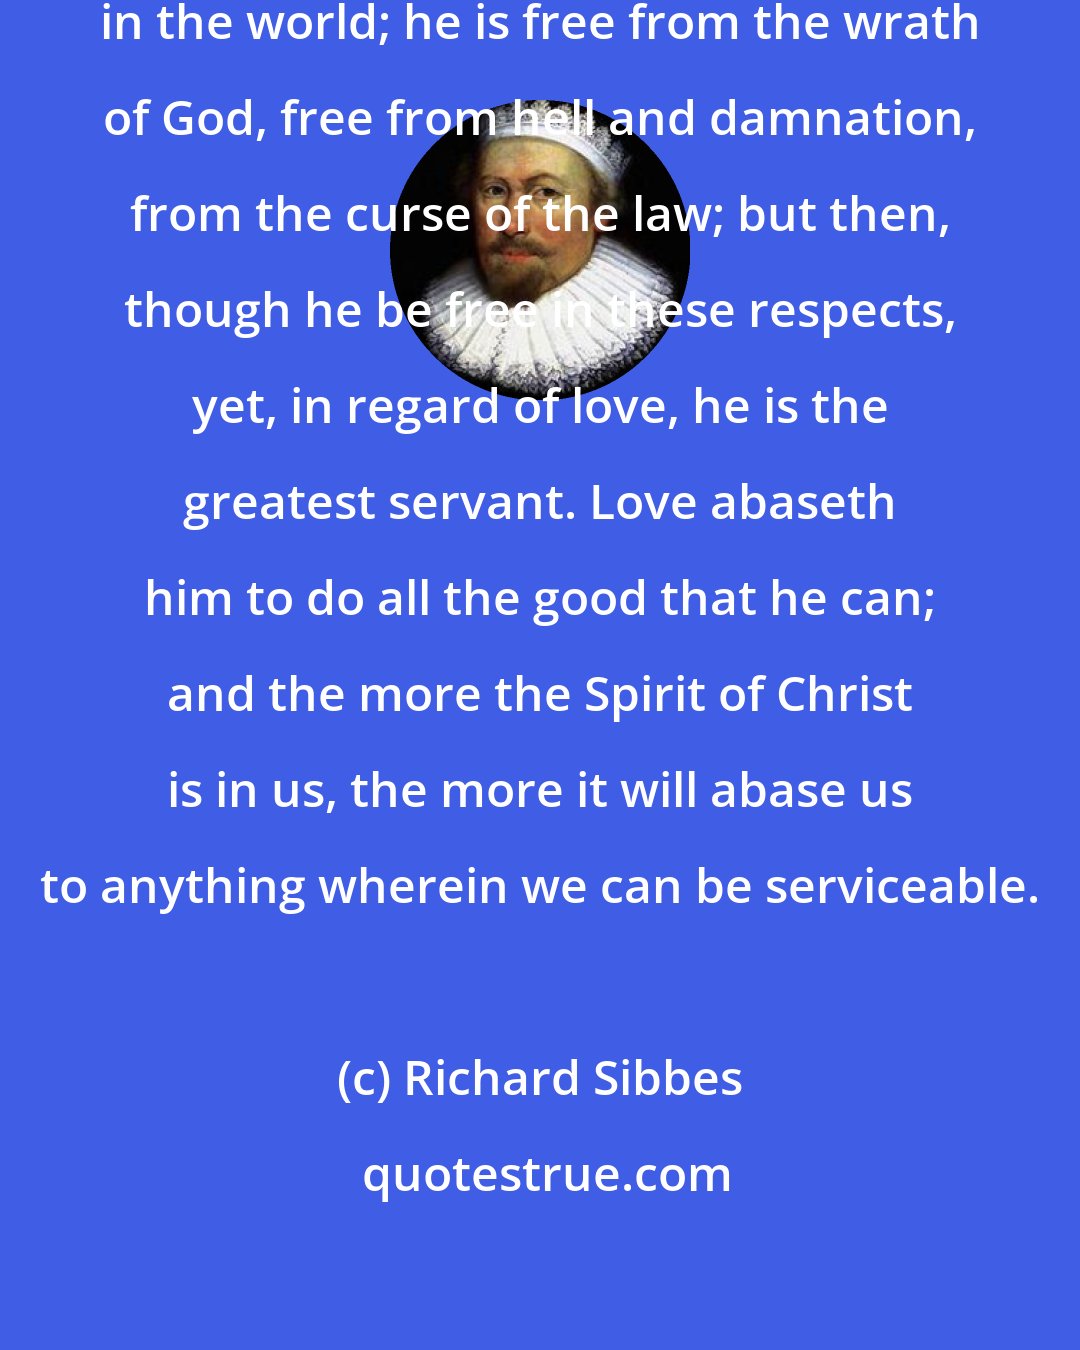 Richard Sibbes: A Christian is the greatest freeman in the world; he is free from the wrath of God, free from hell and damnation, from the curse of the law; but then, though he be free in these respects, yet, in regard of love, he is the greatest servant. Love abaseth him to do all the good that he can; and the more the Spirit of Christ is in us, the more it will abase us to anything wherein we can be serviceable.